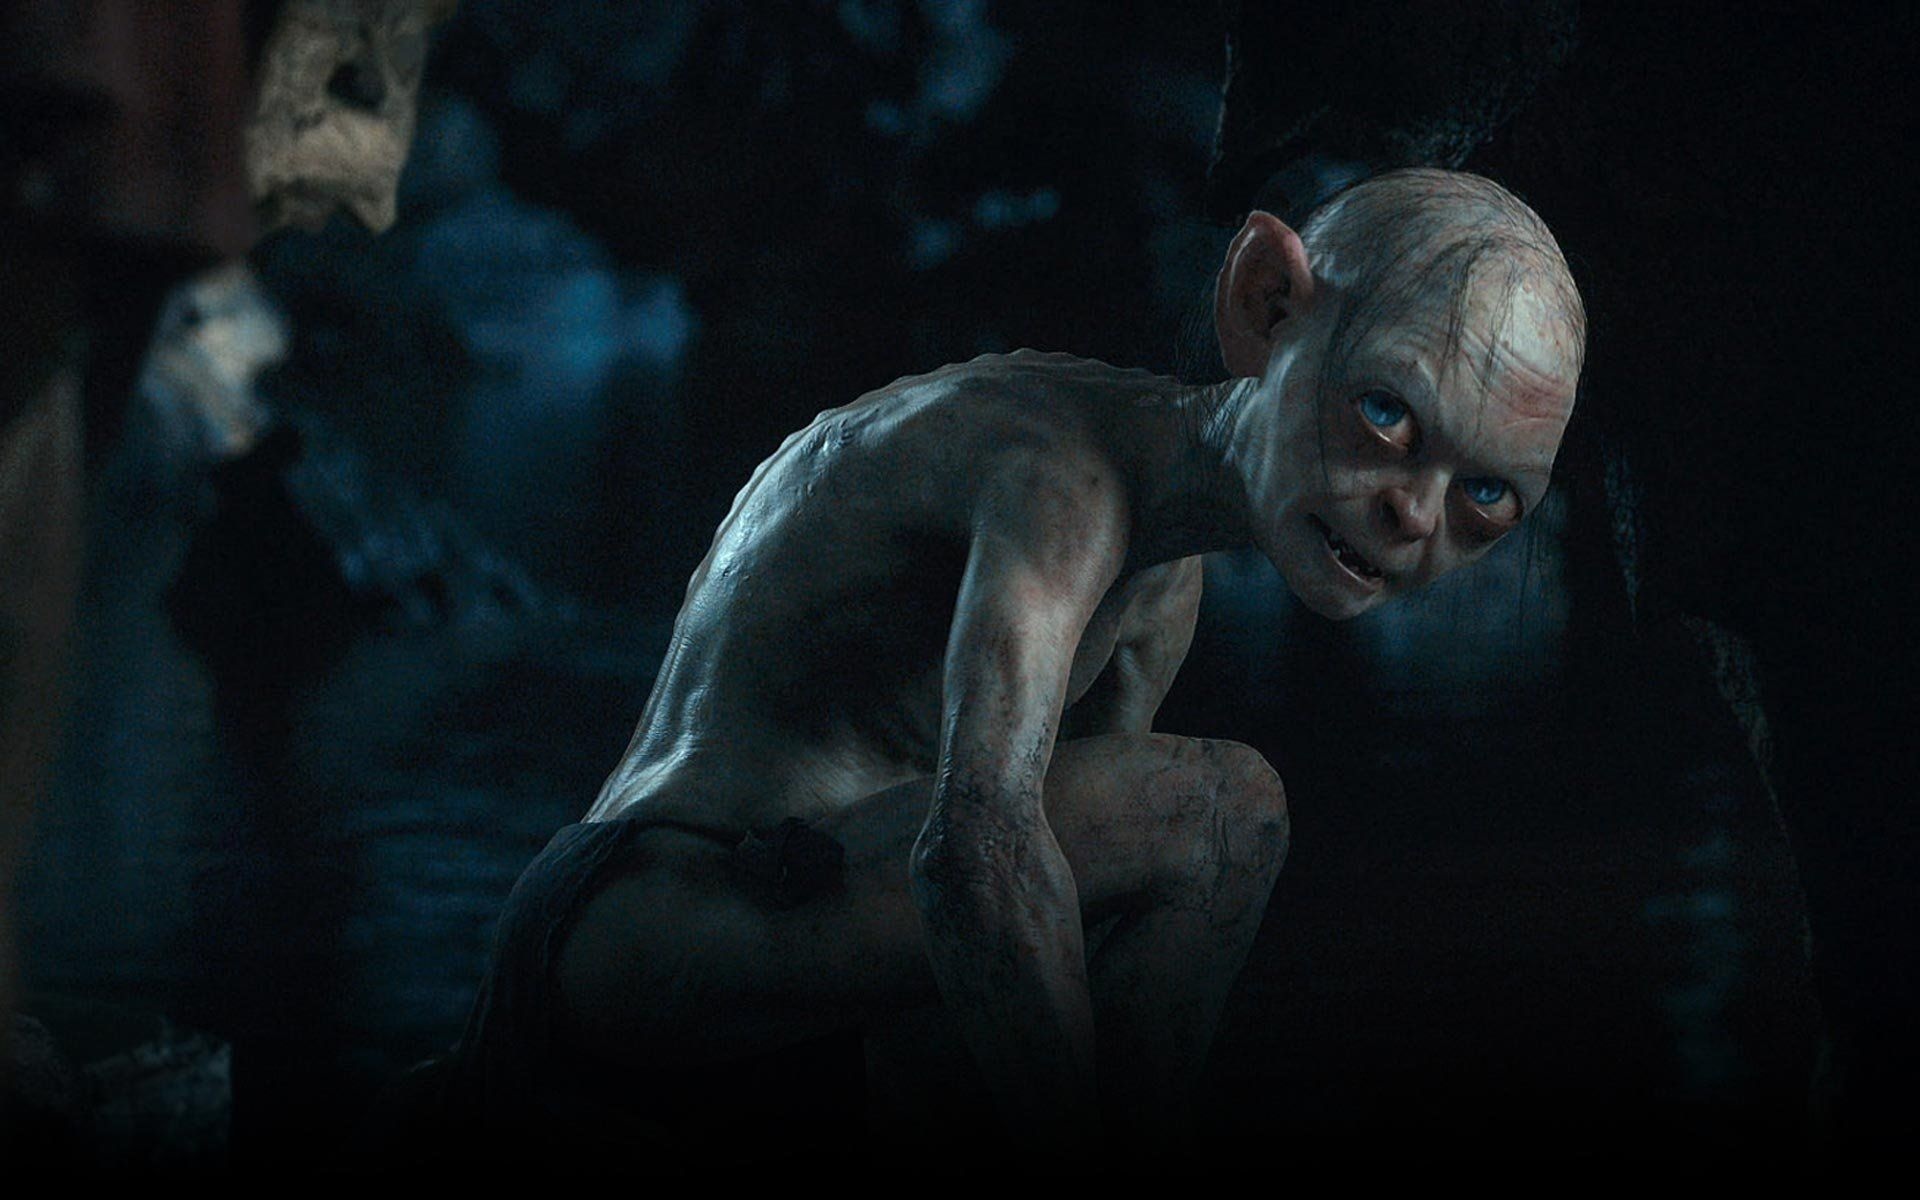 Gollum, Lord of the Rings, High-quality wallpapers, Free backgrounds, 1920x1200 HD Desktop